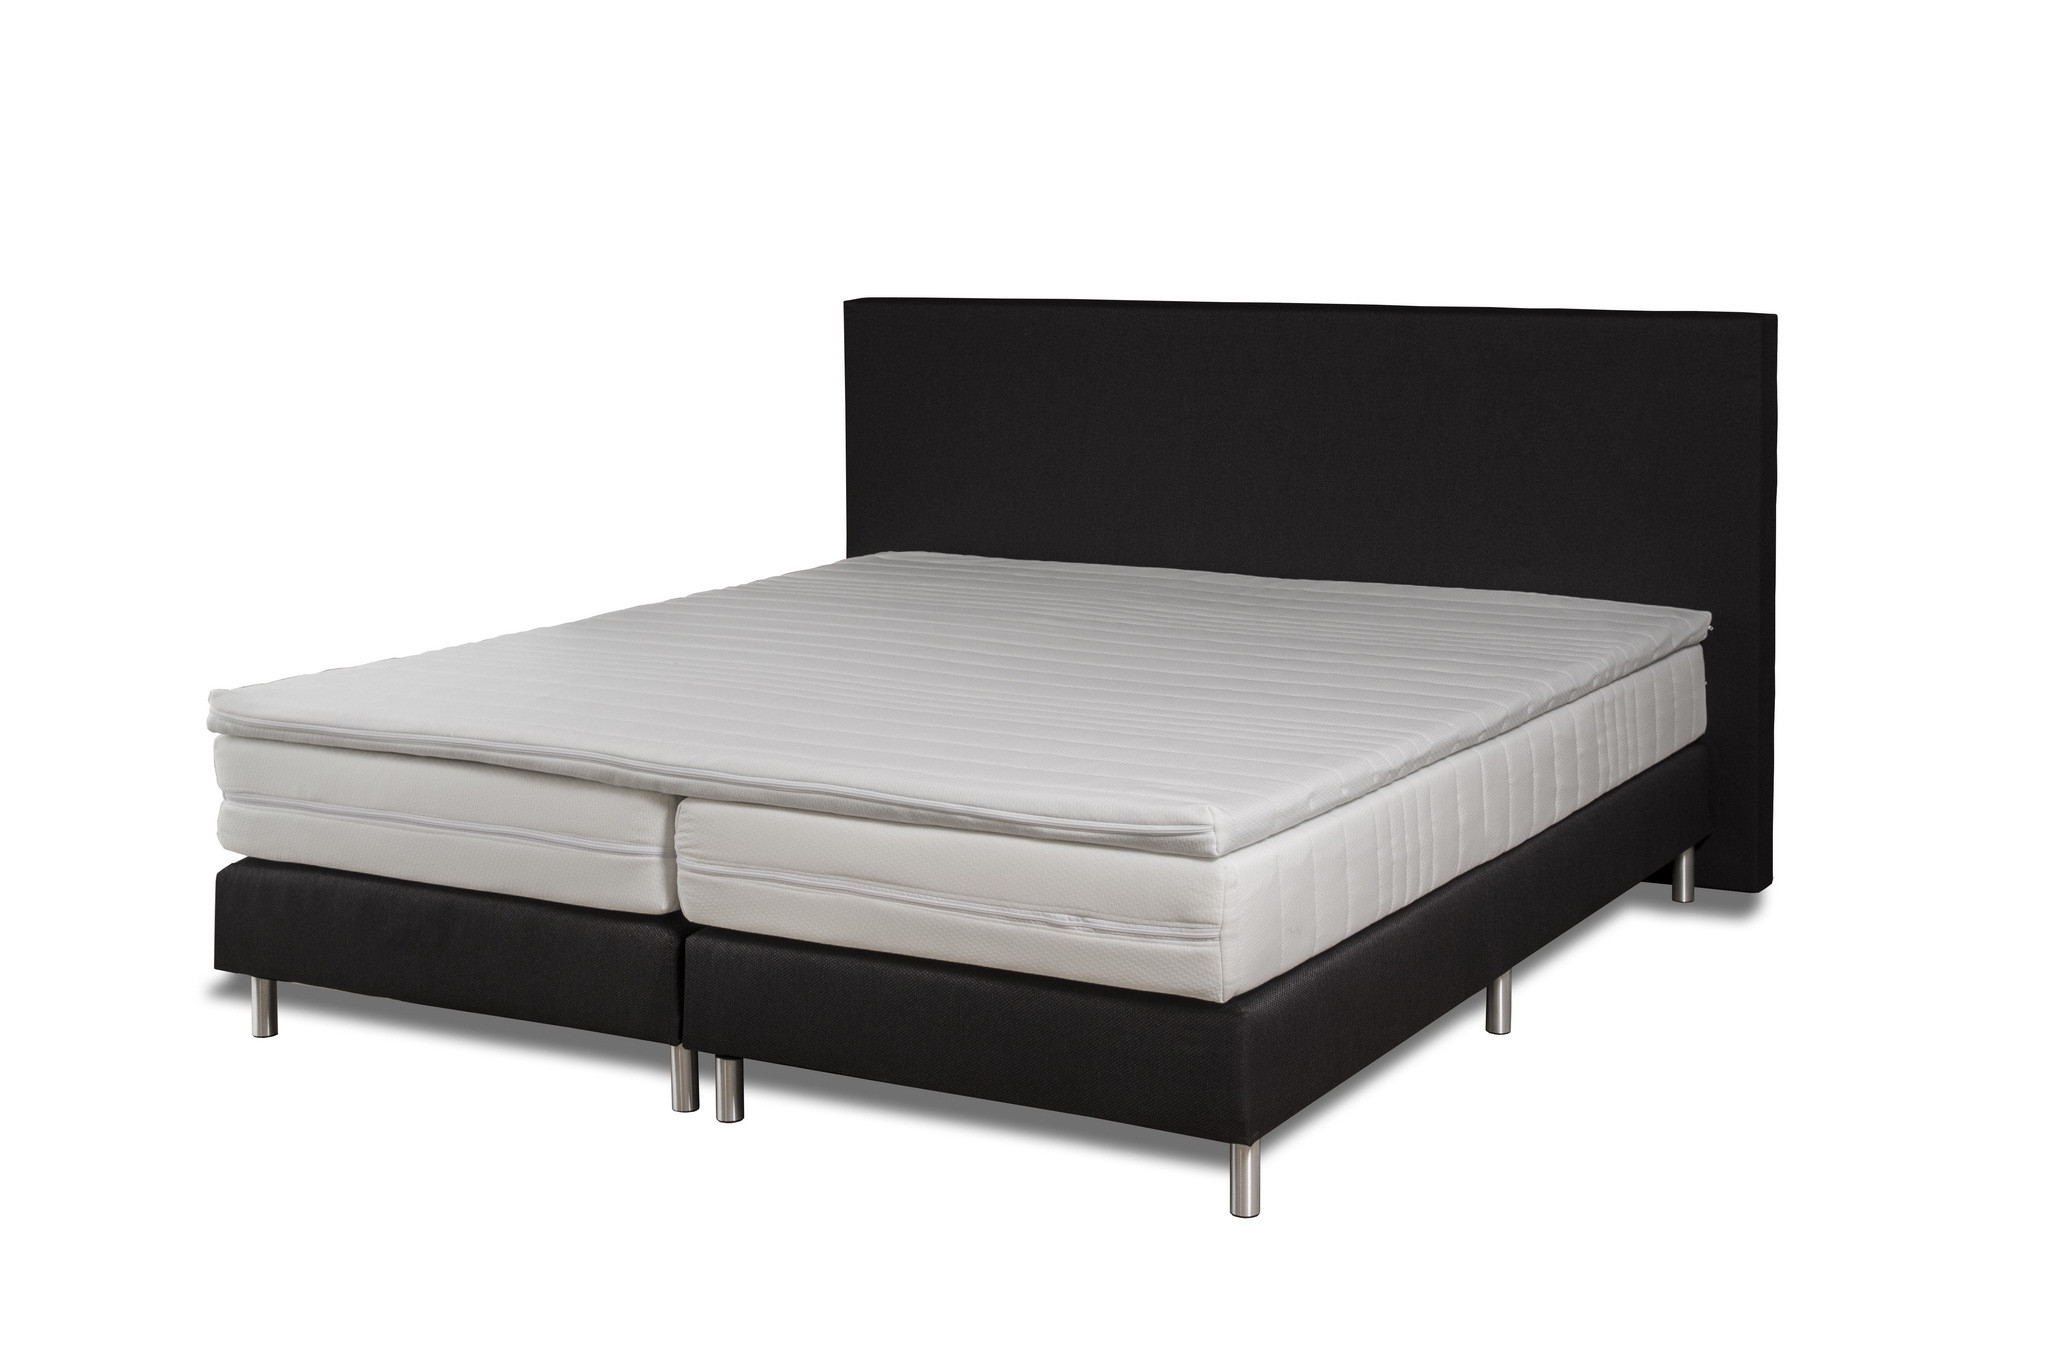 Rent a Boxspring bed 2 persons 180x200? Rent at KeyPro furniture rental!